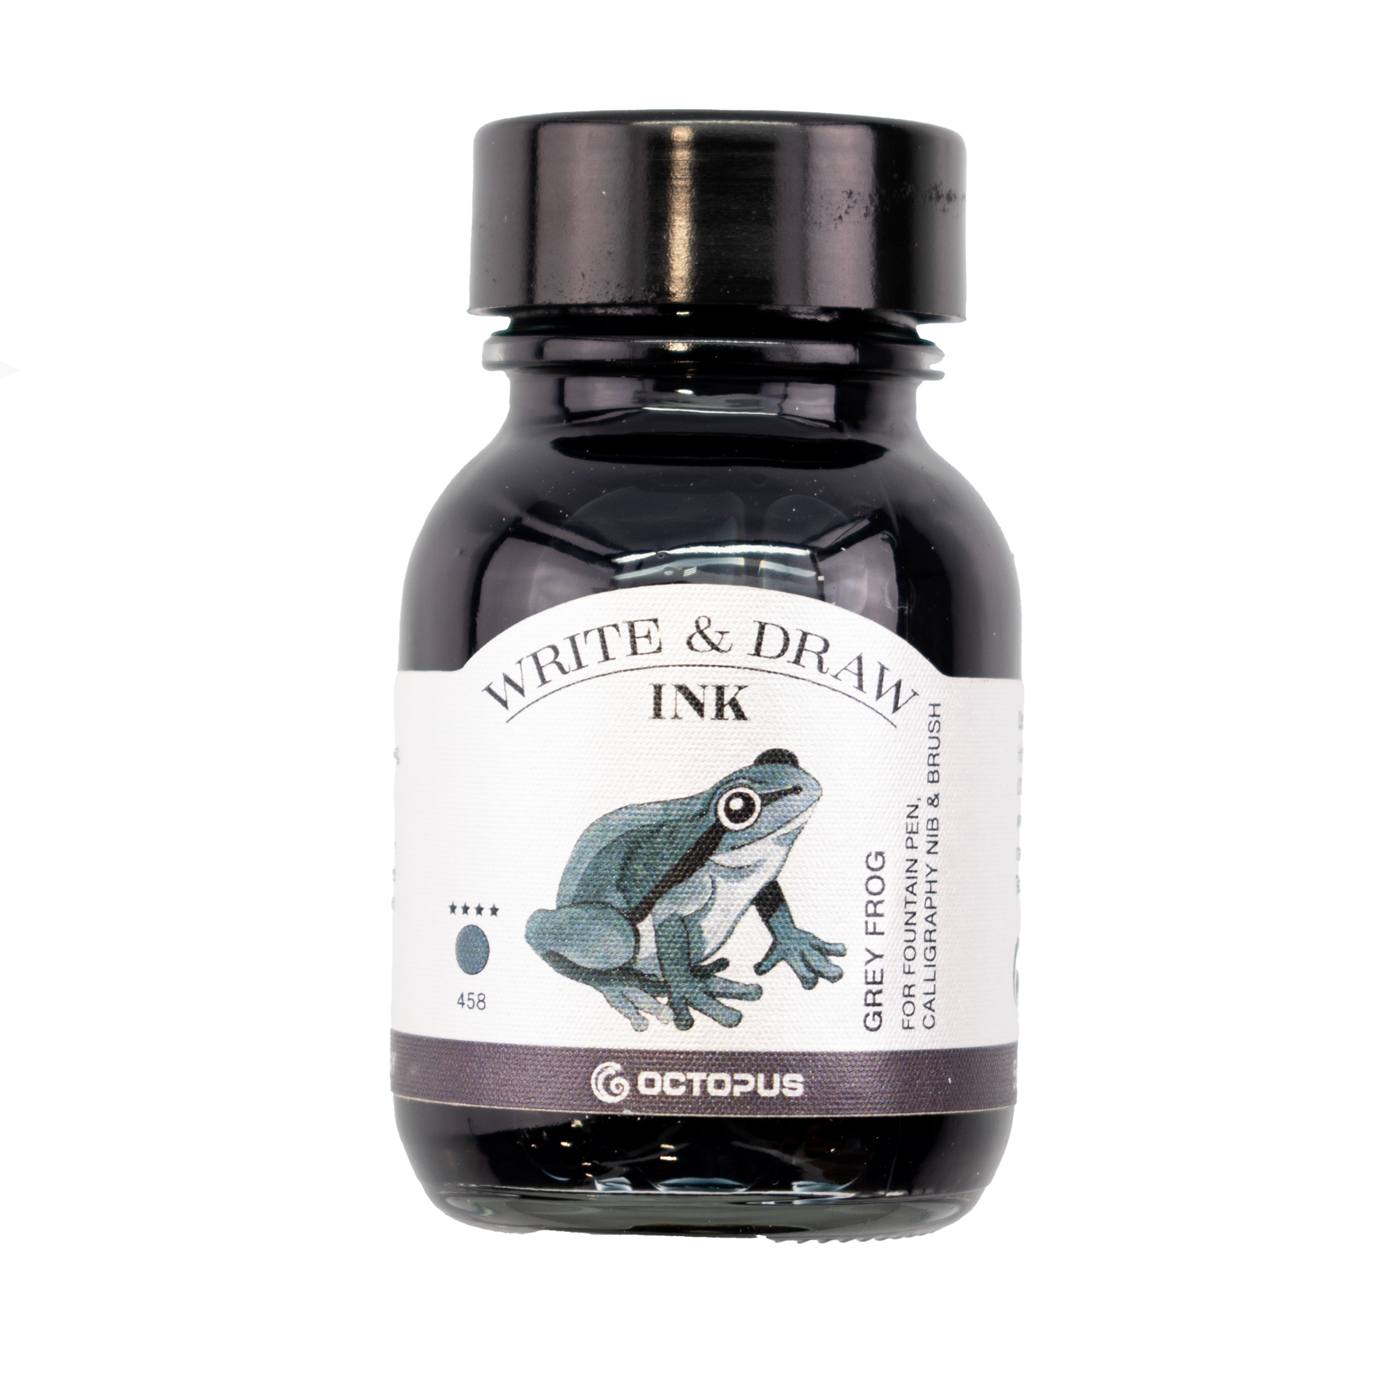 Octopus Write and Draw Ink 458 Grey Frog